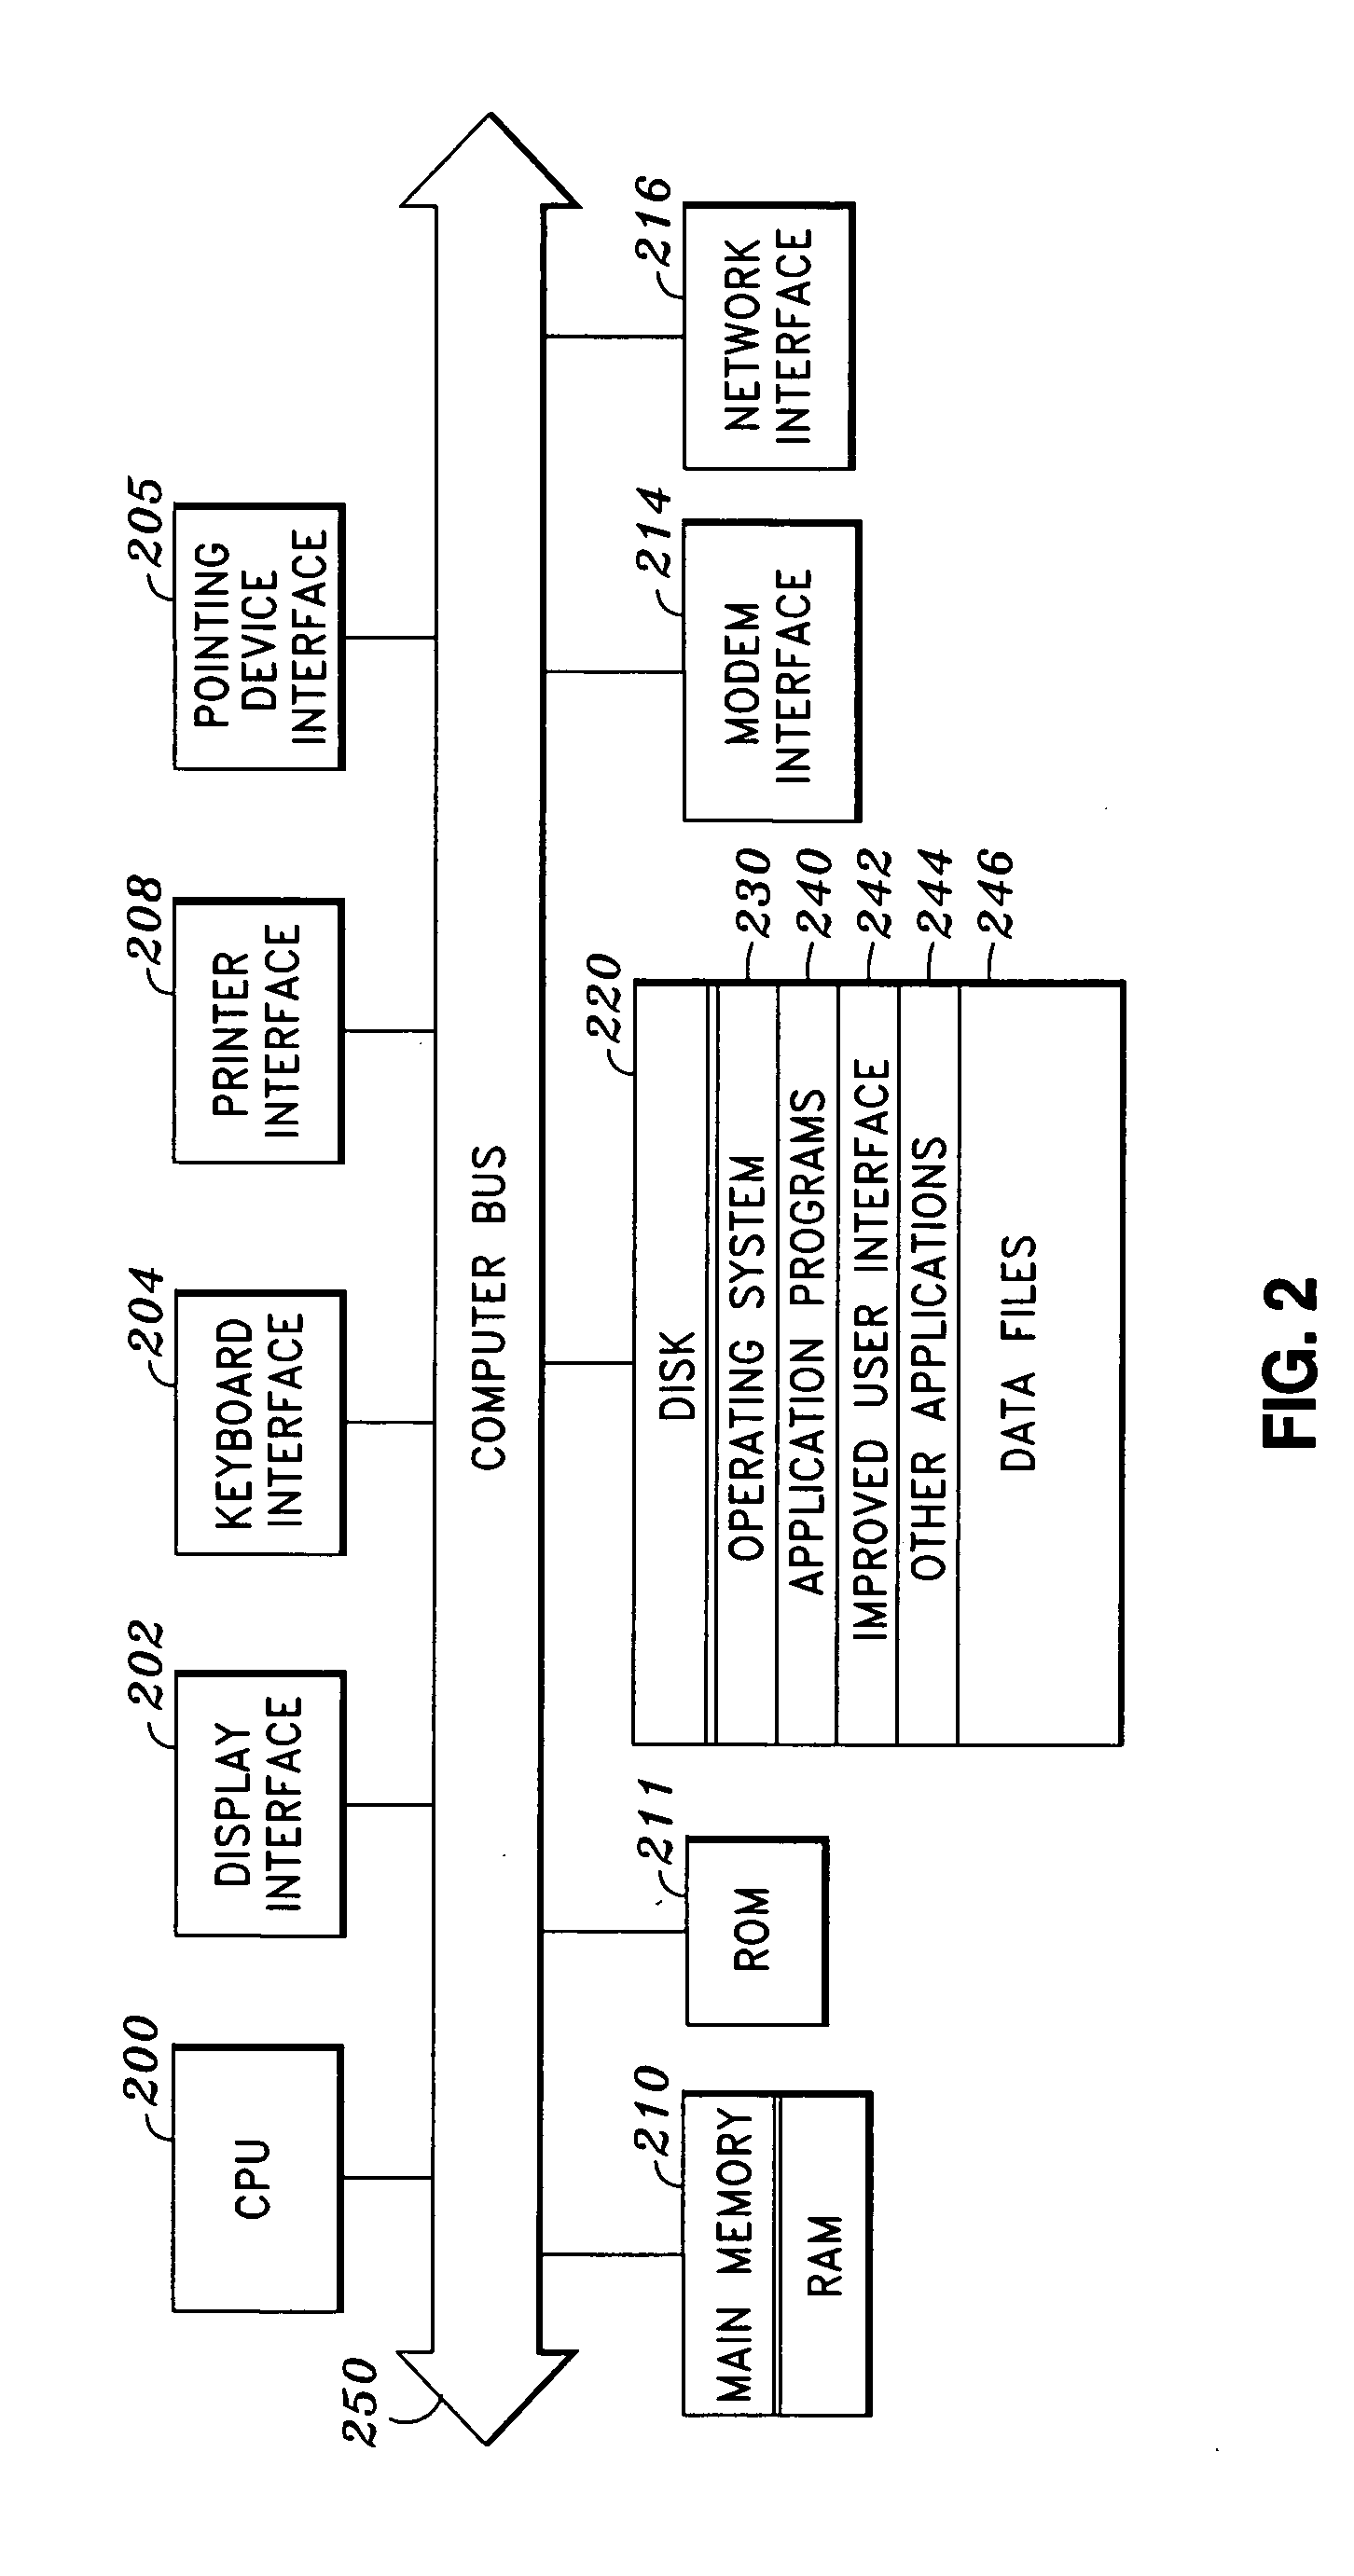 User interface for remote computing devices